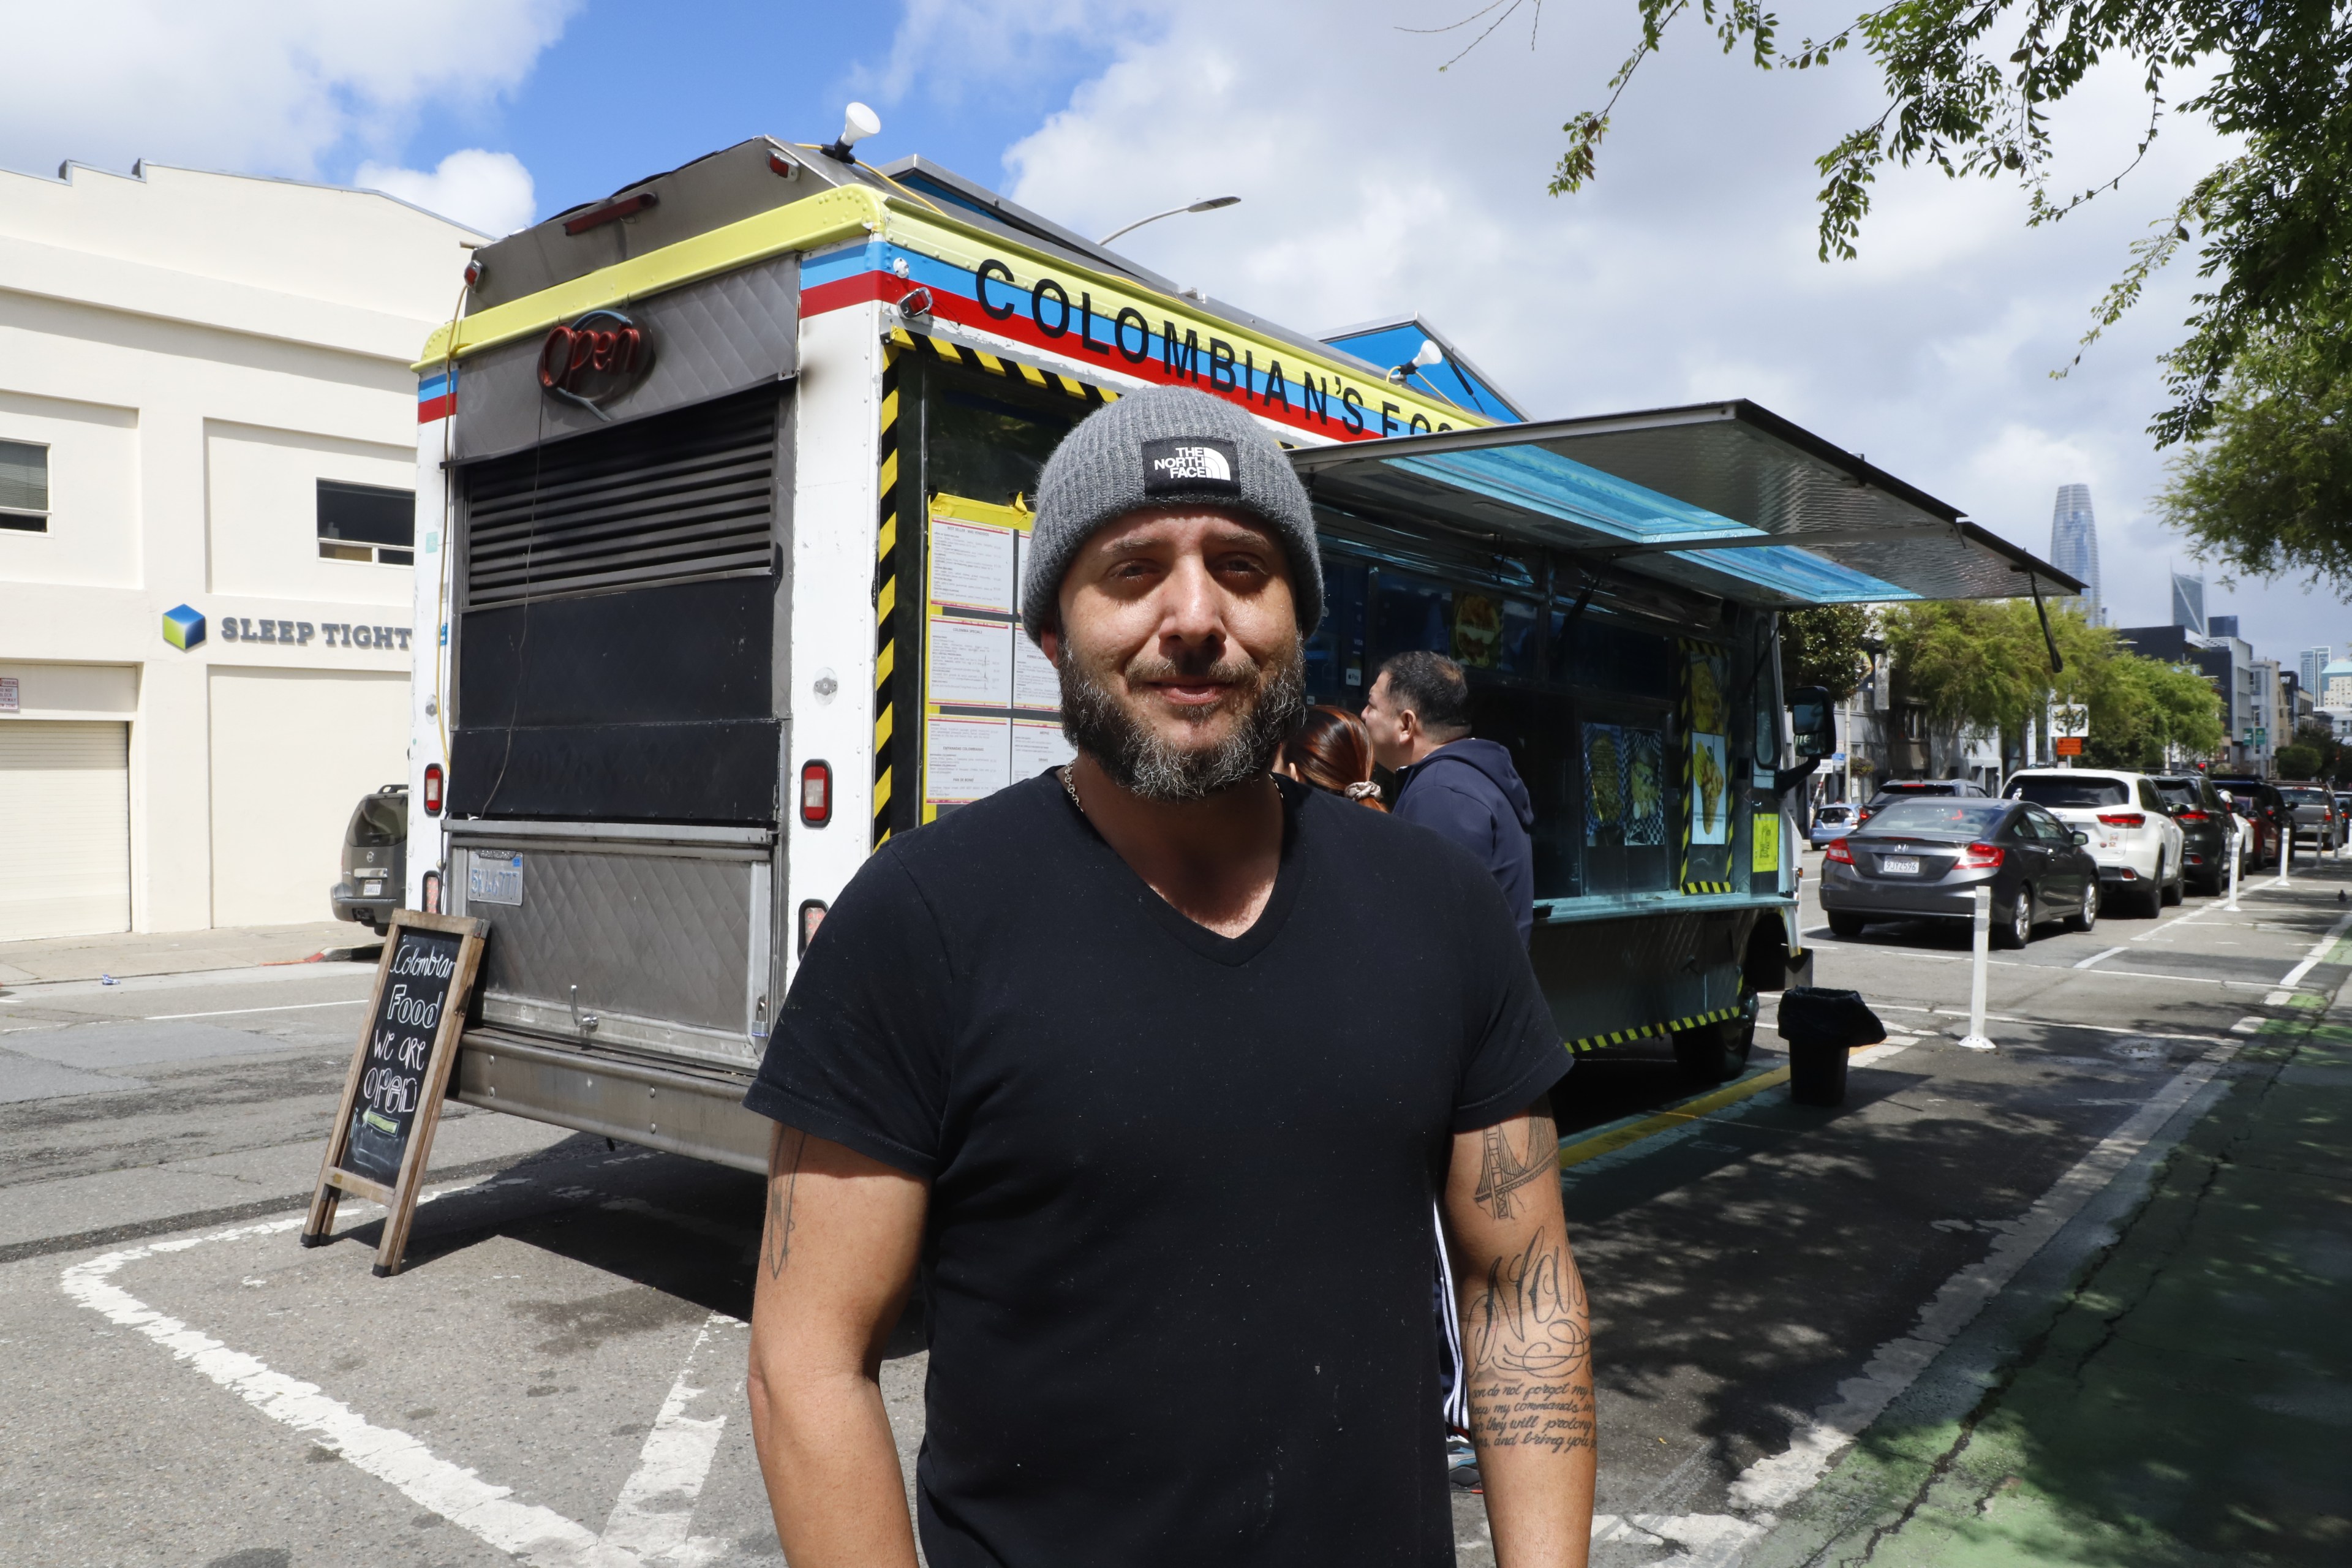 A man in a beanie stands smiling in front of a colorful Colombian food truck on a city street.